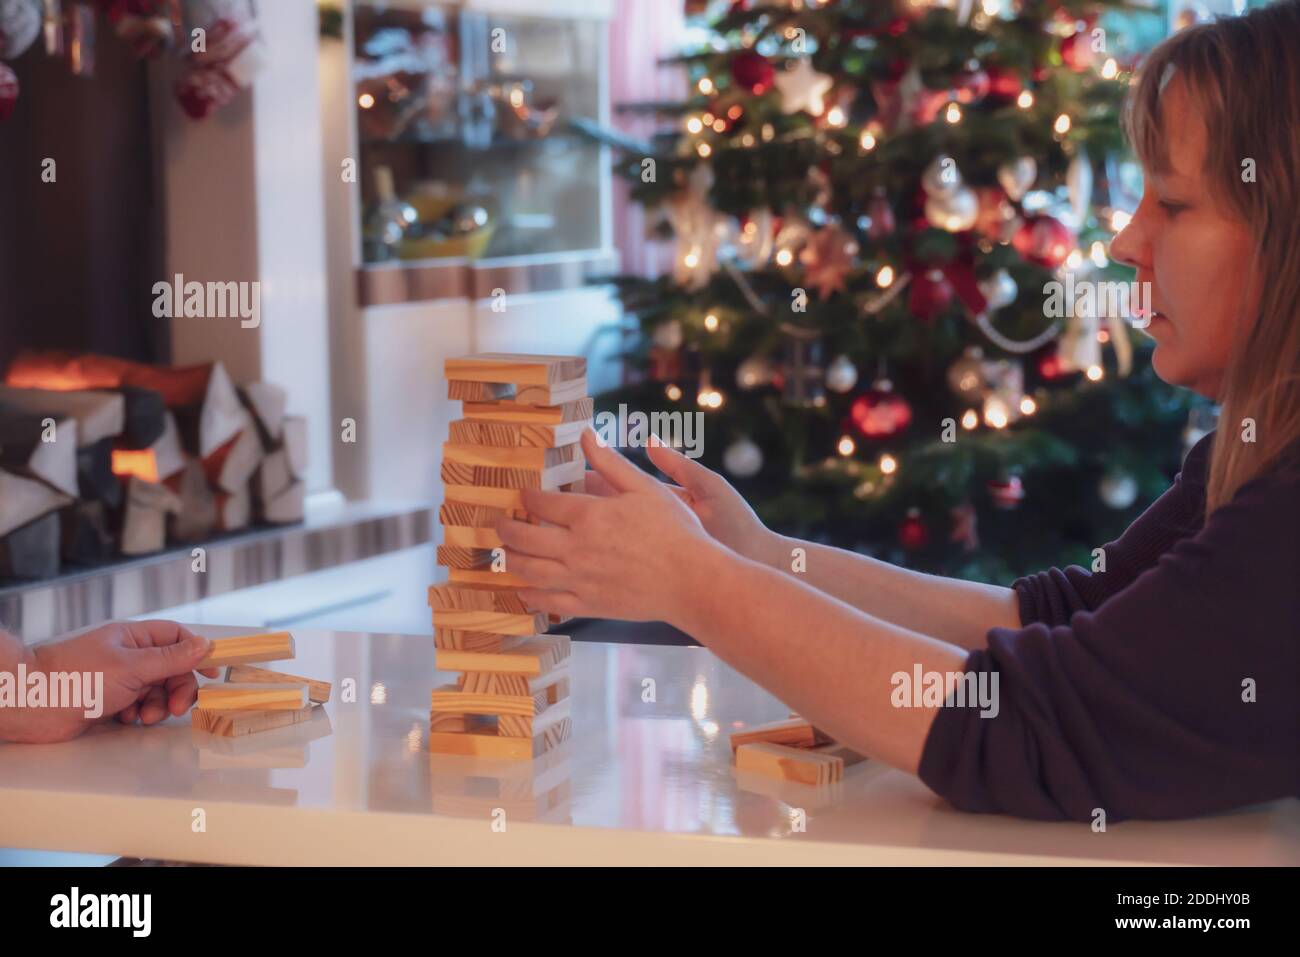 During the Christmas season, the family plays board games together. Woman and man build a wobbly tower from wooden blocks. In the background is the Ch Stock Photo